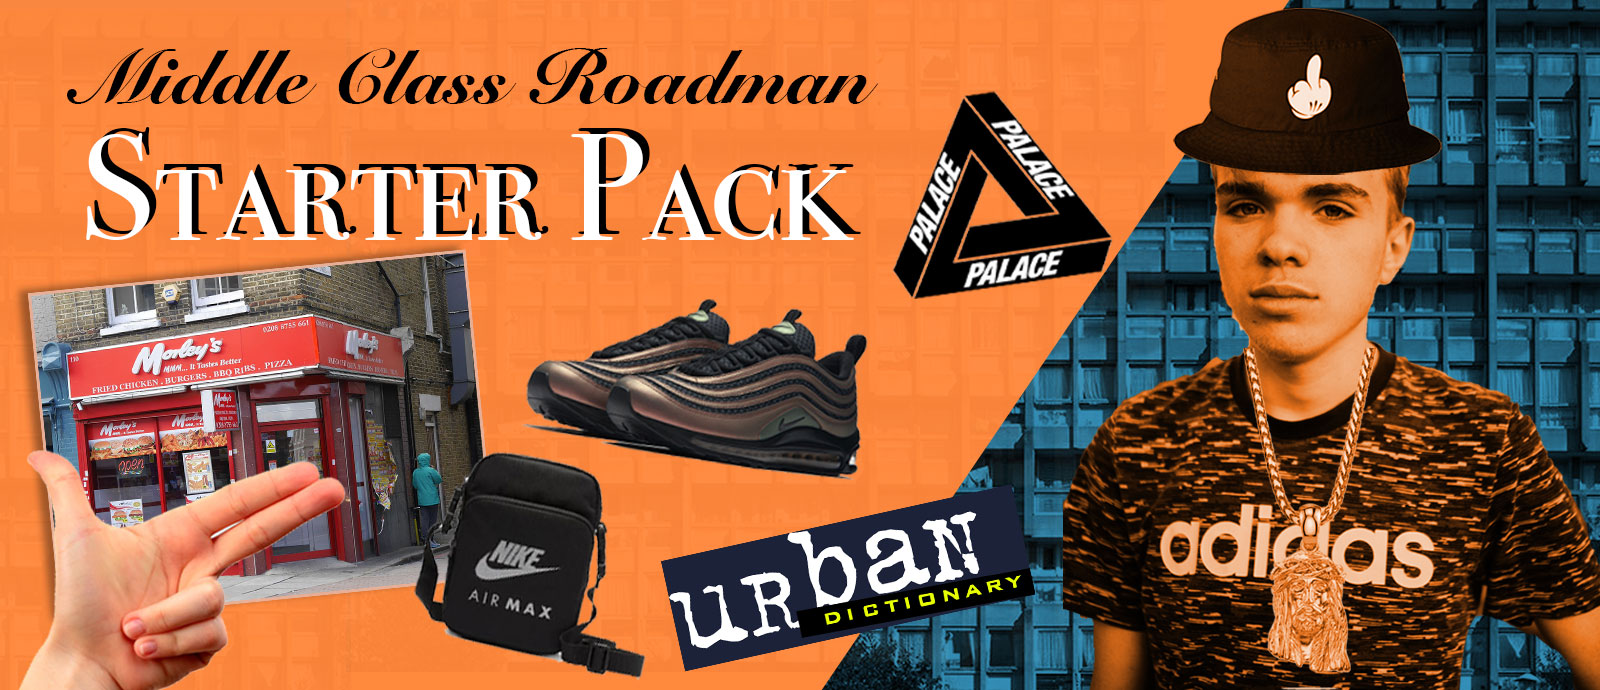 Here's your Middle-Class Roadman Starter Pack - Rife Magazine